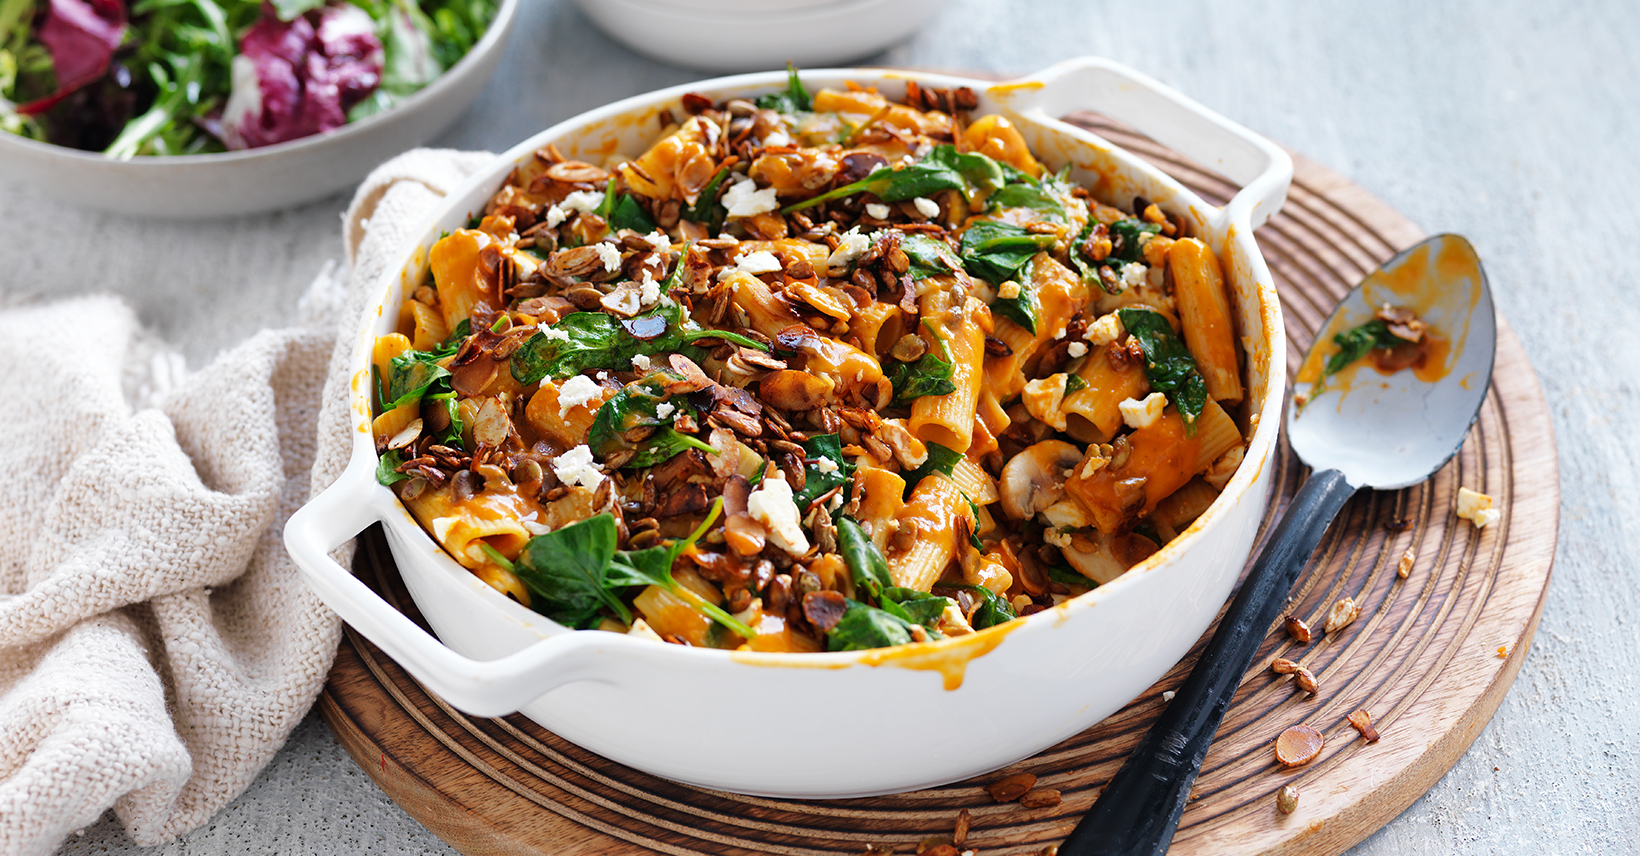 Pumpkin & Sage Pasta Bake with a Seed Crumble Topping Recipe